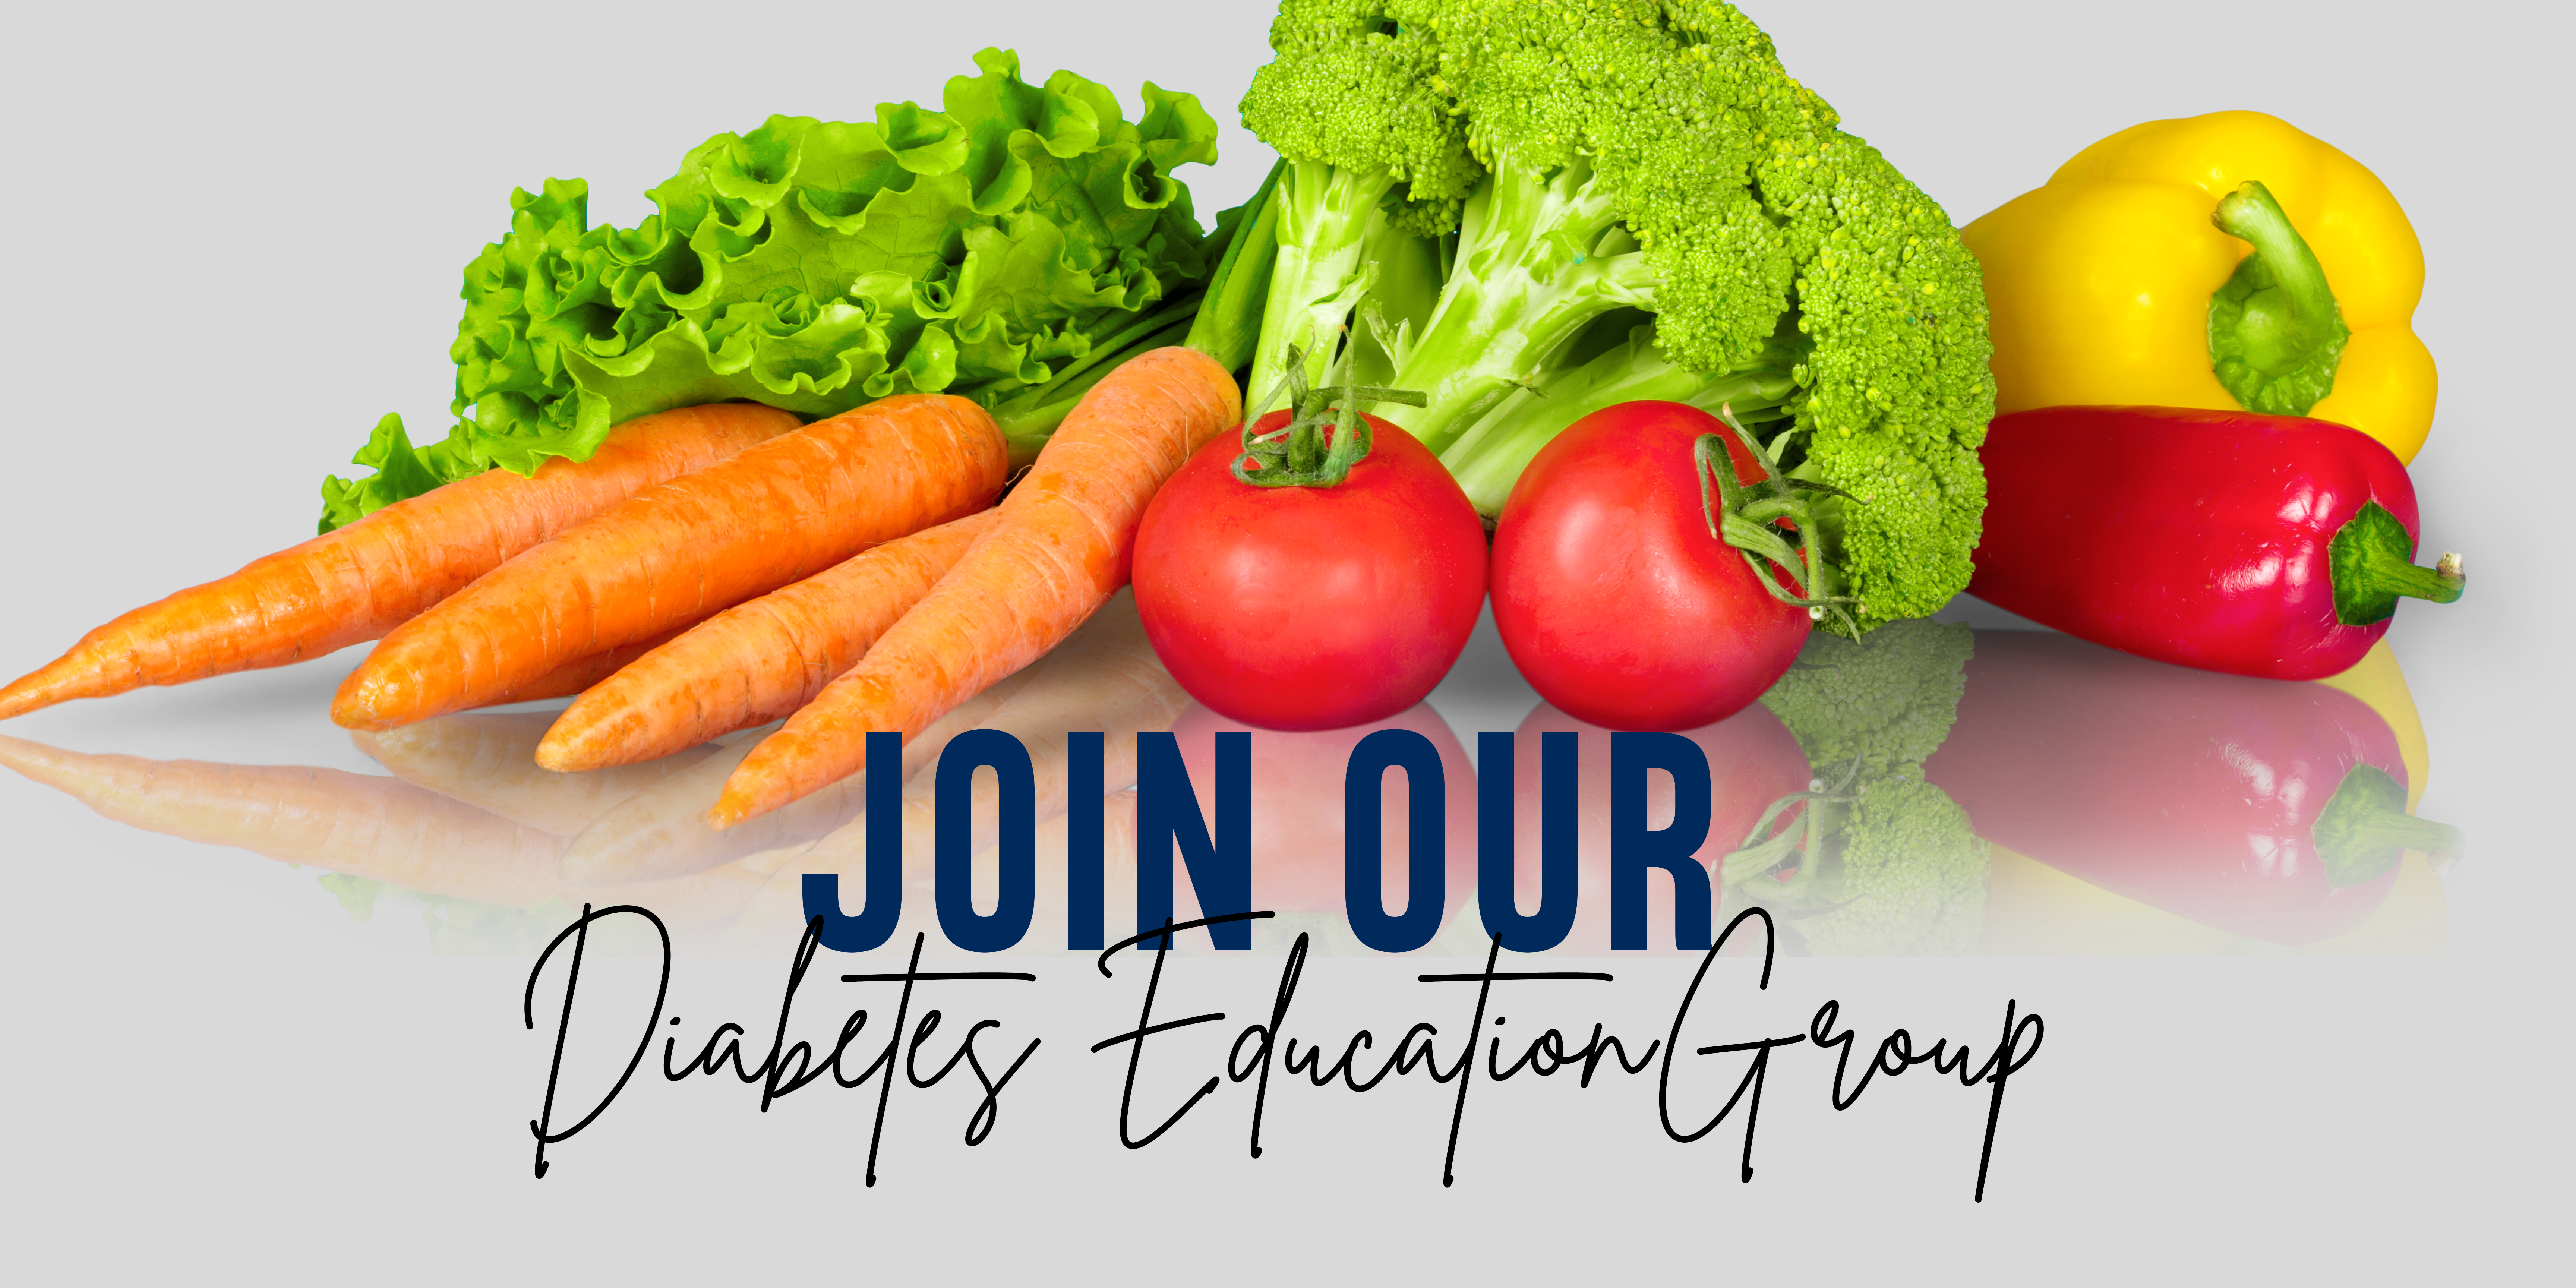 Gray background with fruits and vegetables with words that say, "join our diabetes education group"